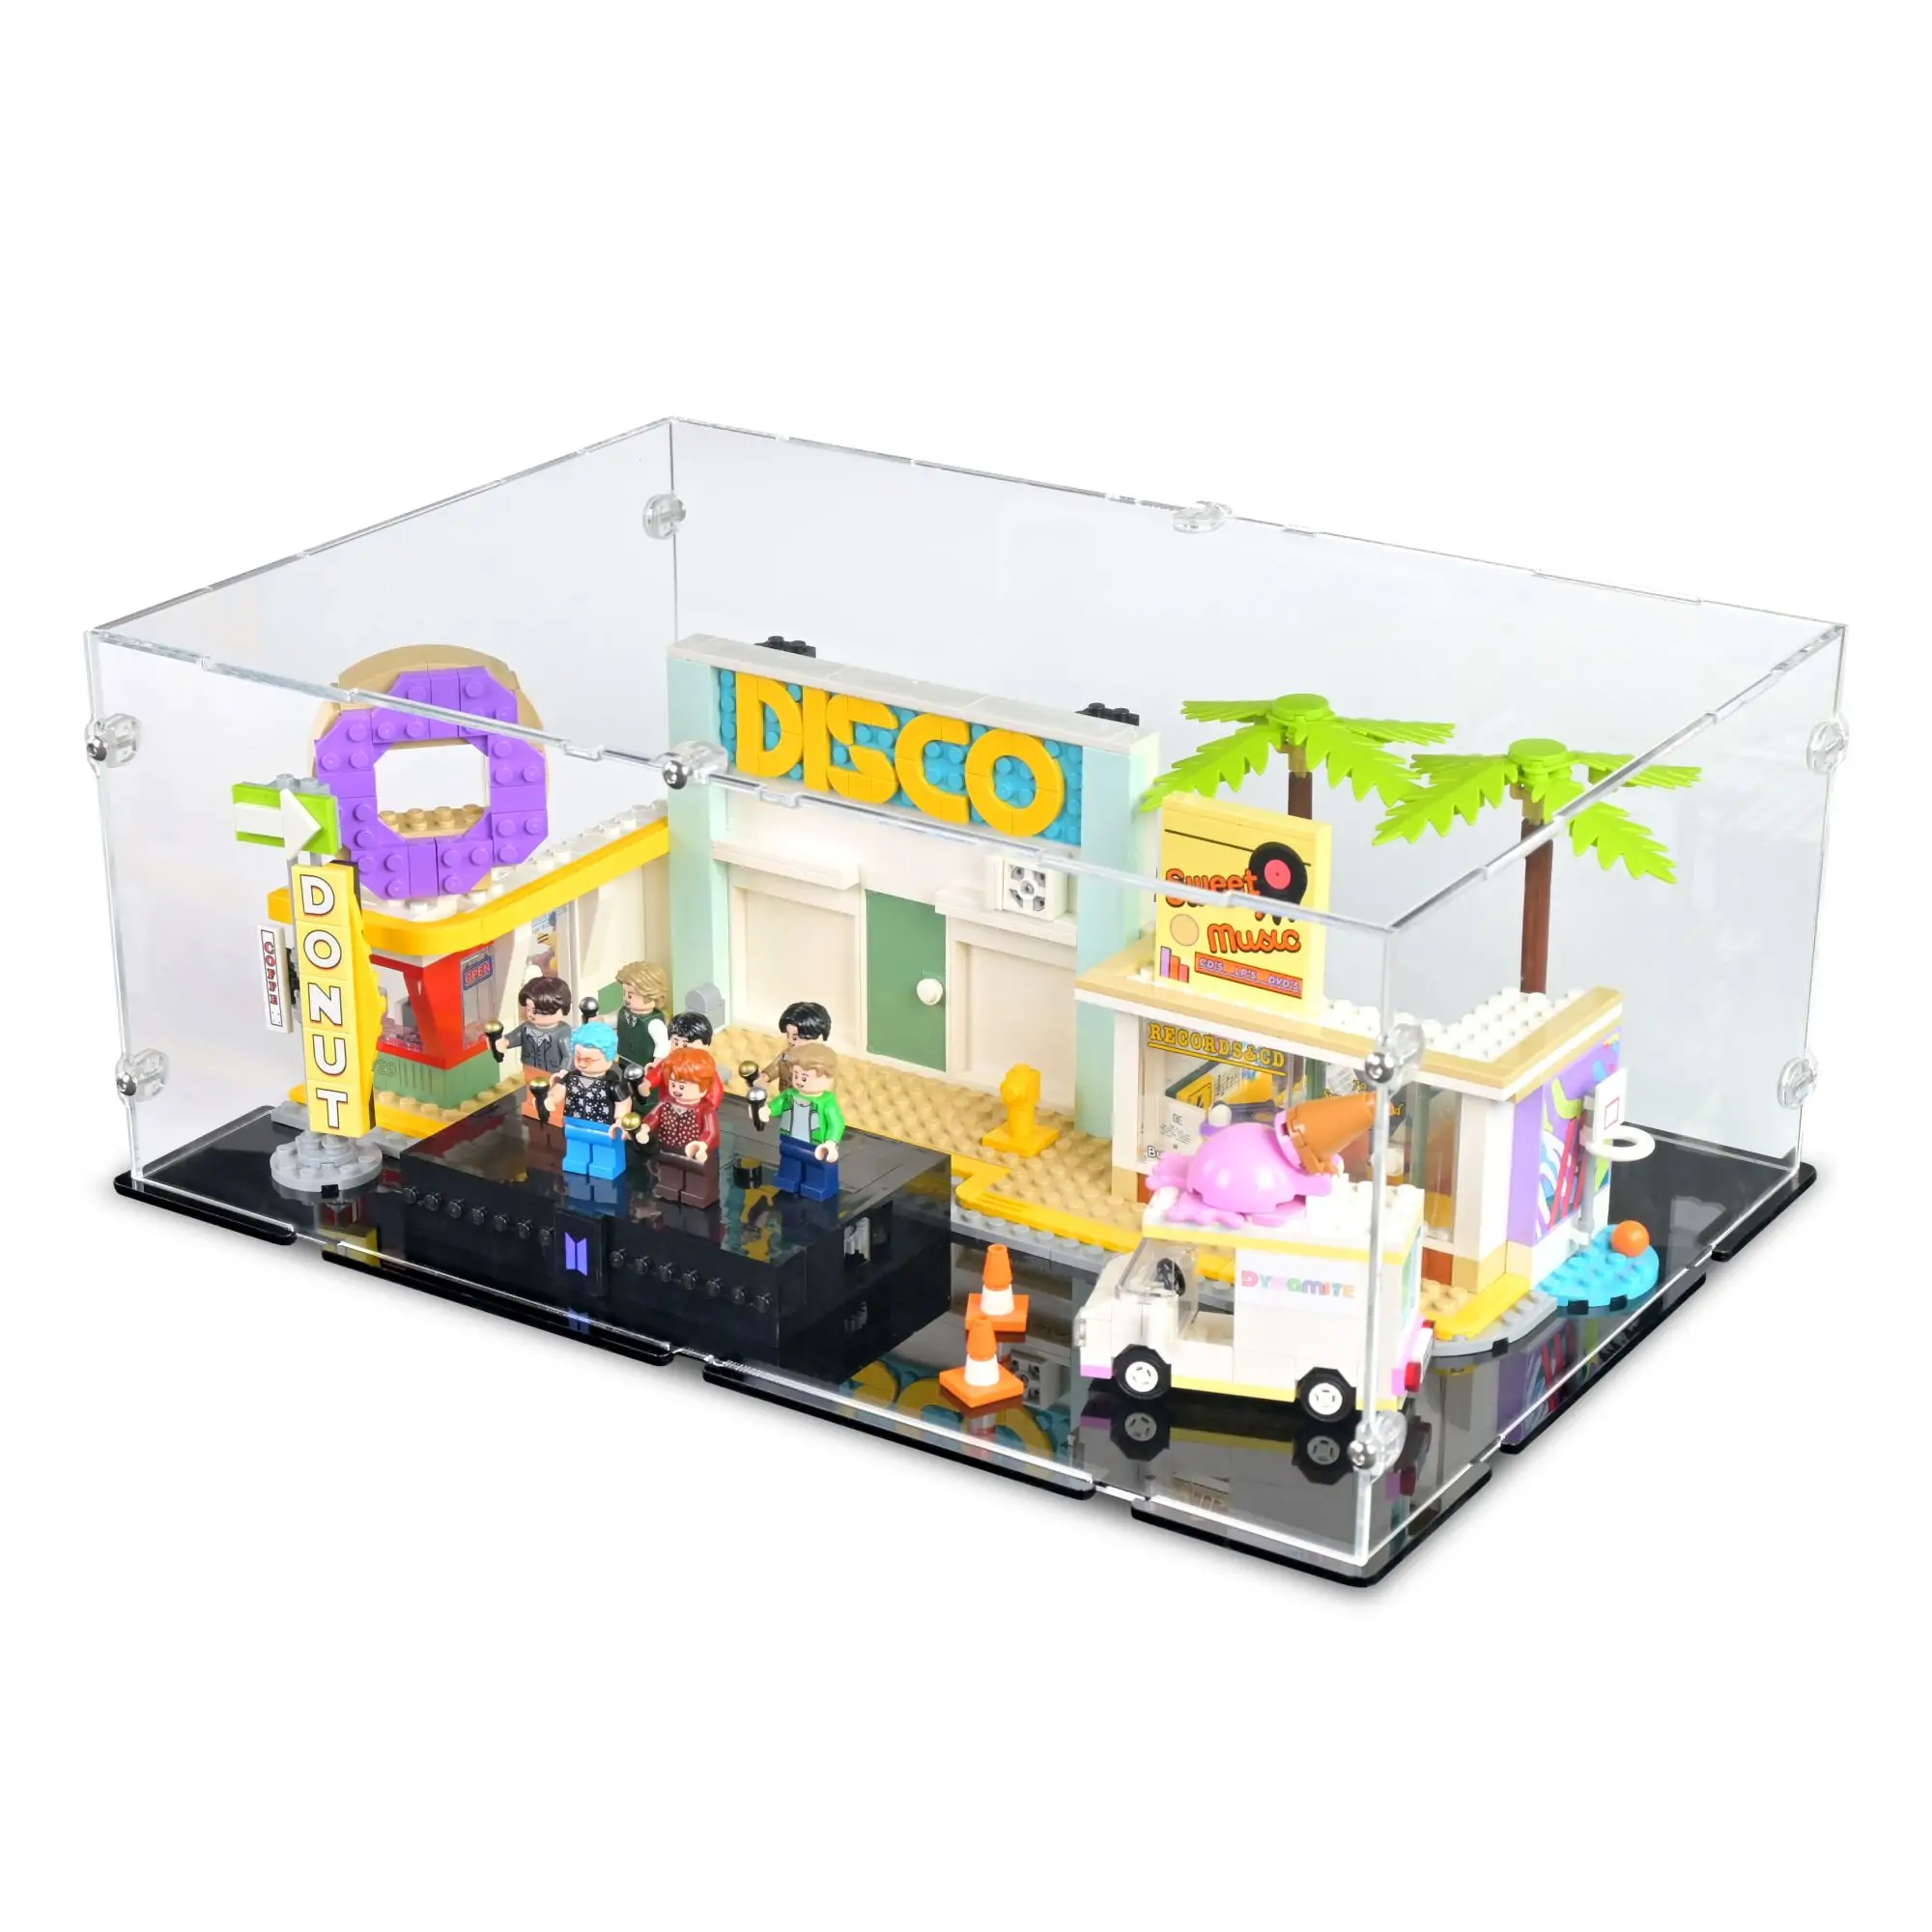  Jetlet 3mm Acrylic Display Box, Dustproof Cover, Compatible  with Lego 21339 Bulletproof Boys Group Blocks Set (S-Grade/Glueless  Version, Display Box Only, The Model Not Included) : Toys & Games